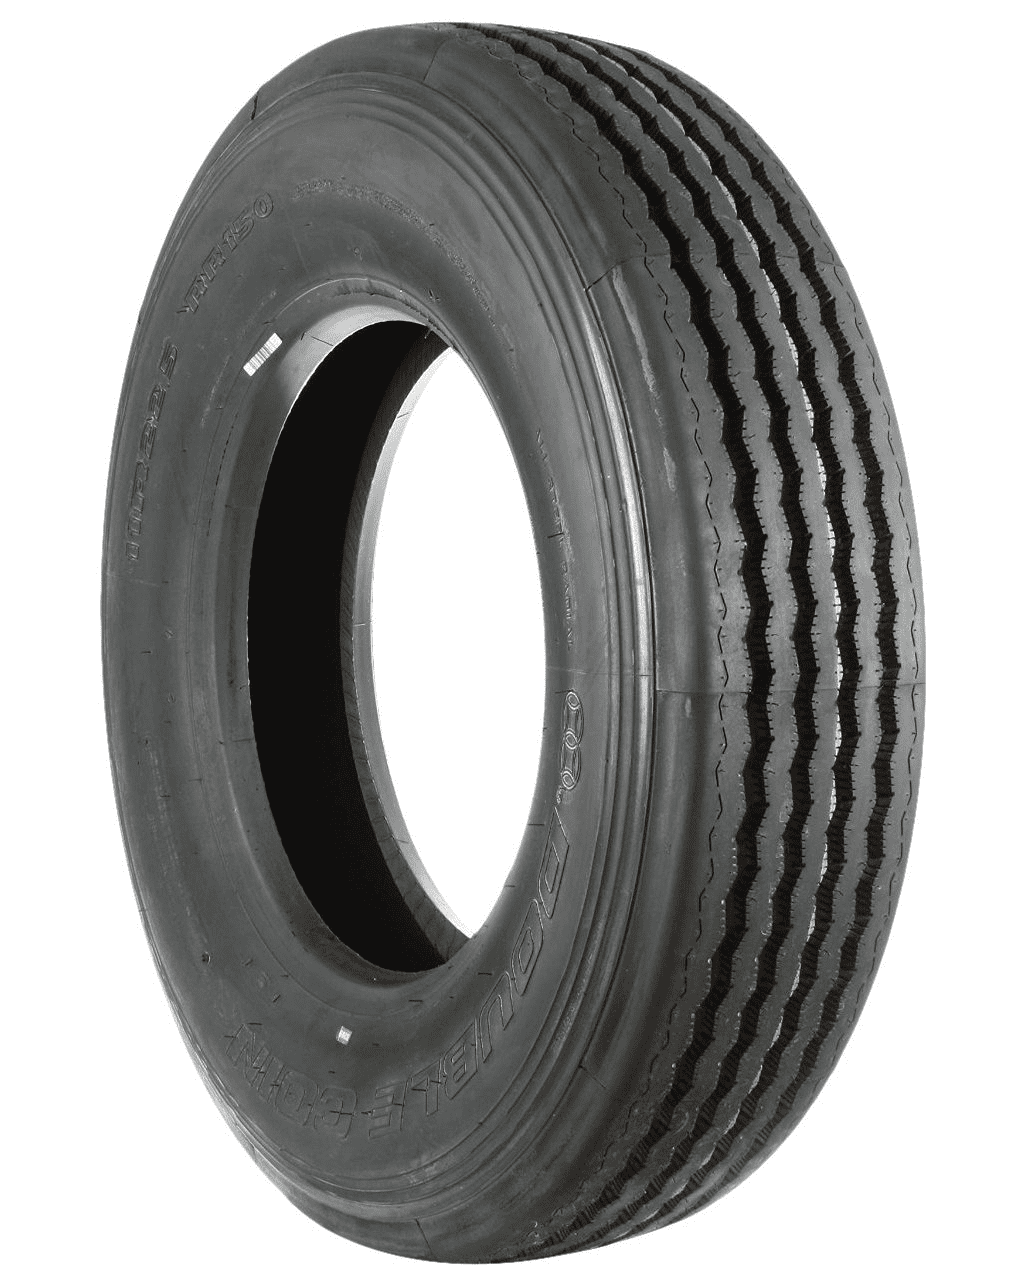 Double Coin RT606 Ultra Premium 5-Rib Regional Steer/All-Position Commercial Radial Truck Tire 11R22.5 14 ply 